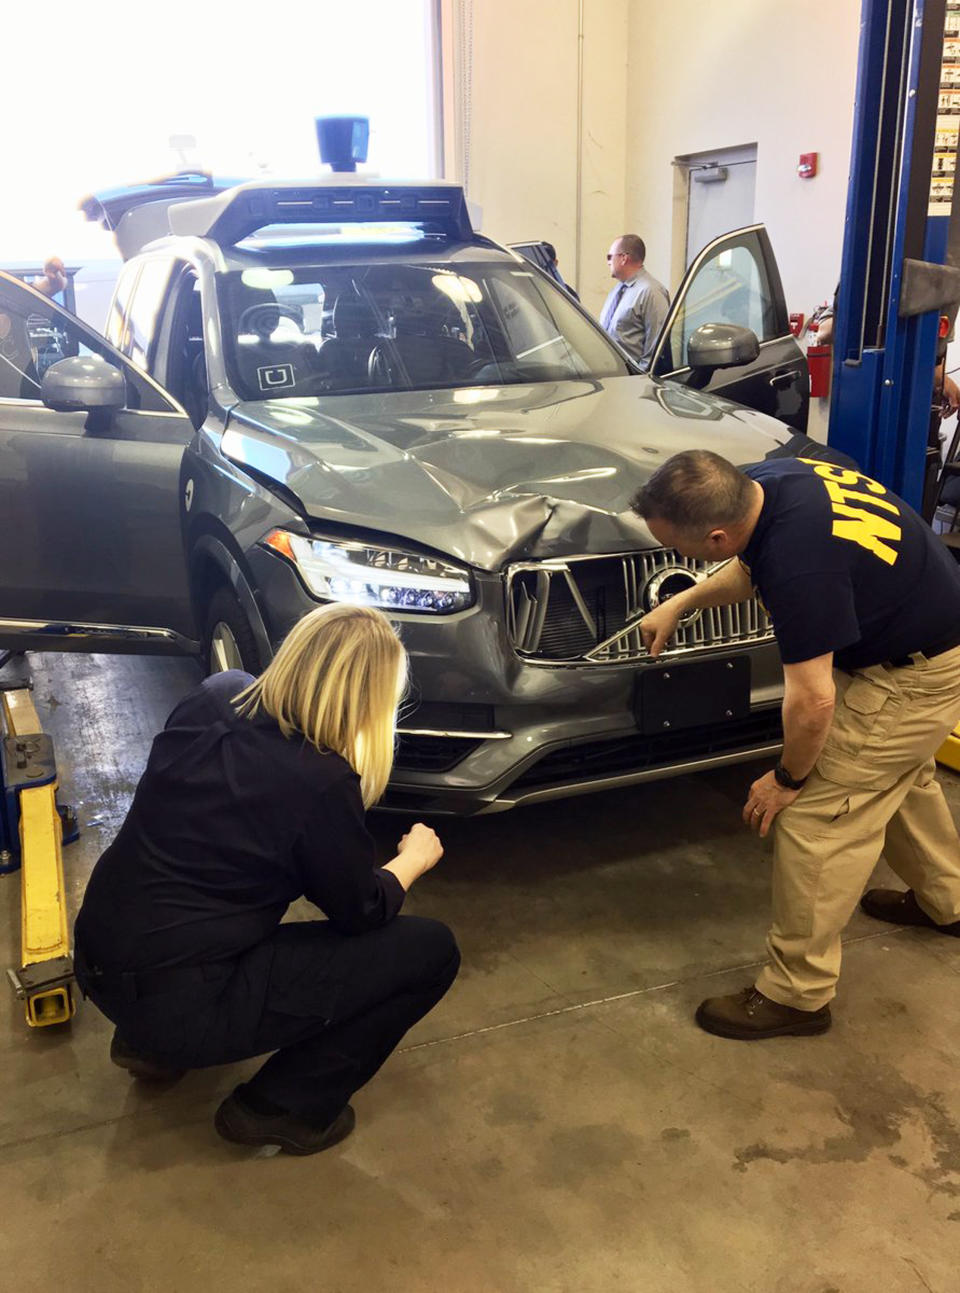 Investigators examine the driverless Uber SUV that fatally struck a woman in Tempe, Arizona. (National Transportation Safety Board via AP)